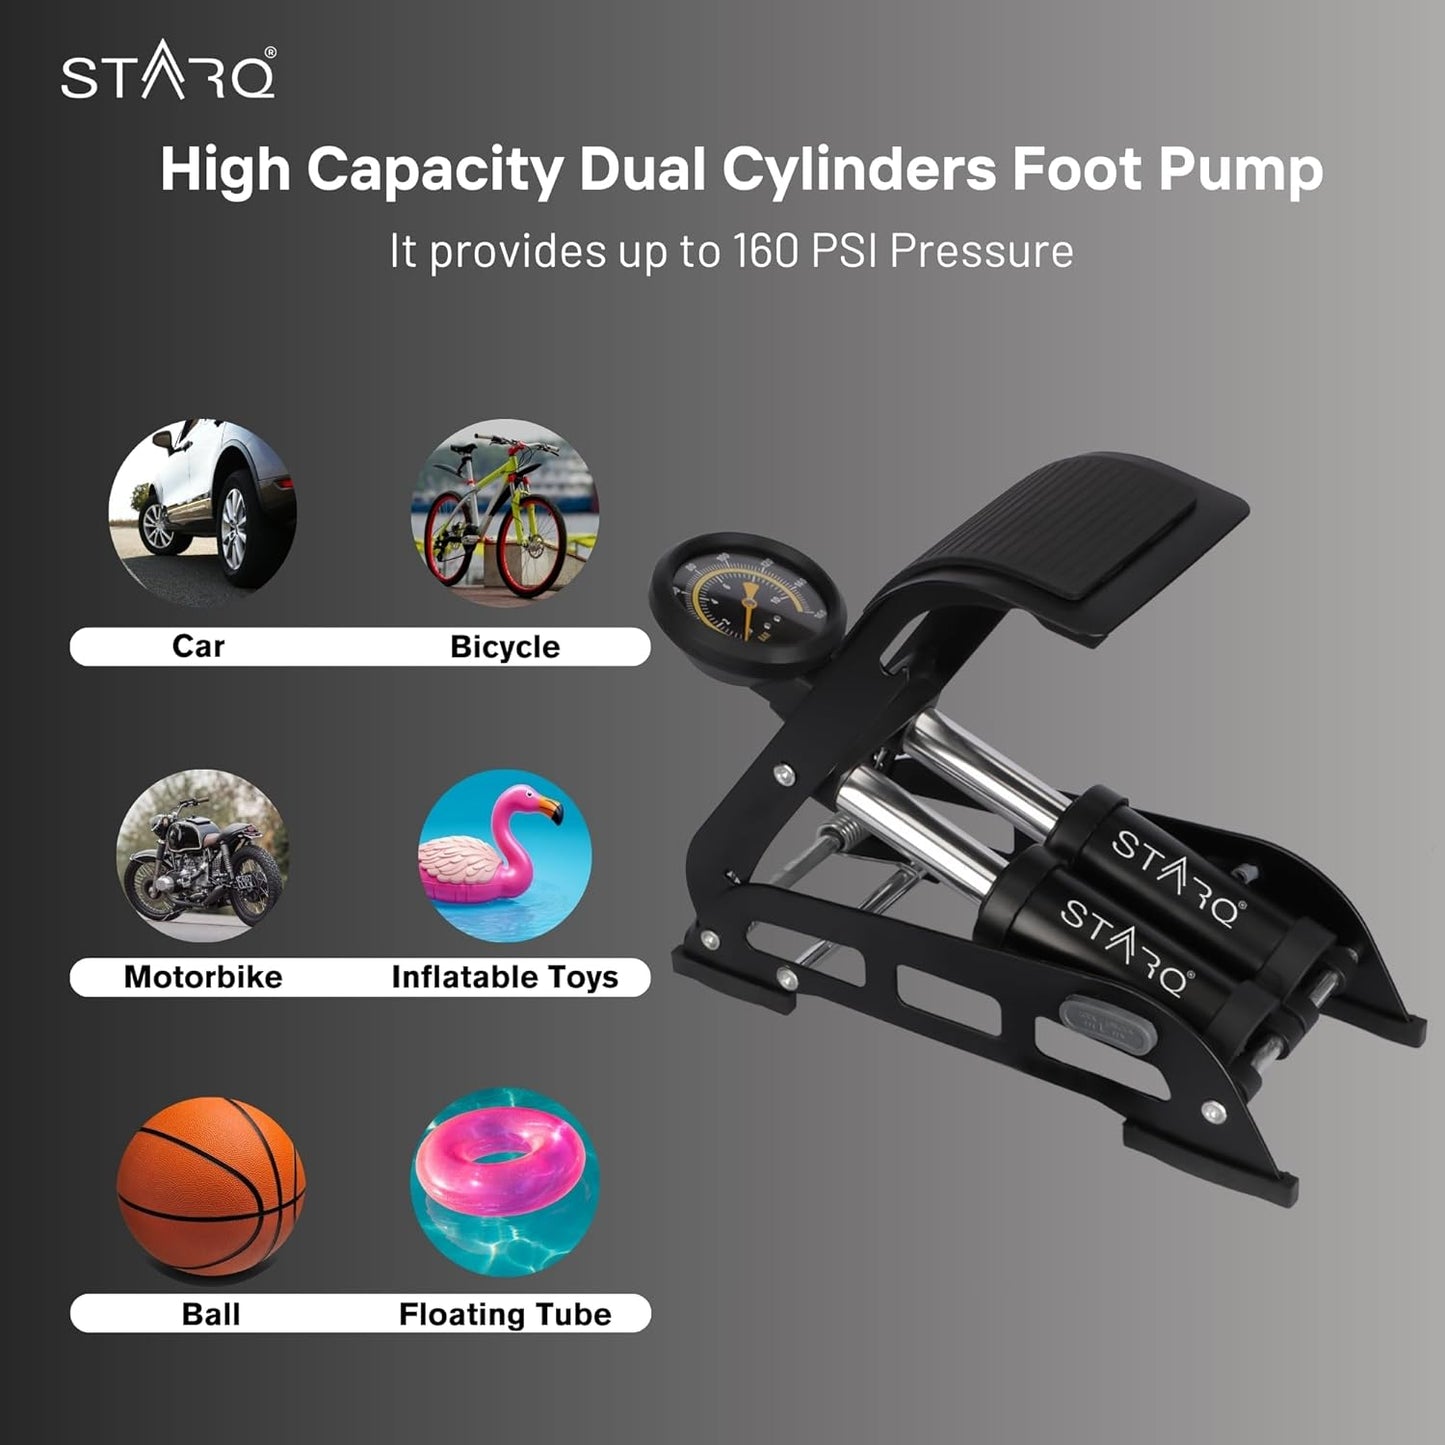 STARQ 160 PSI Double Cylinder Portable High Pressure Foot Air Pump Compressor for Car And Bike Air Pump for Motorbike, Cars, Bicycle For Football, Cycle Pumps For Bicycle,